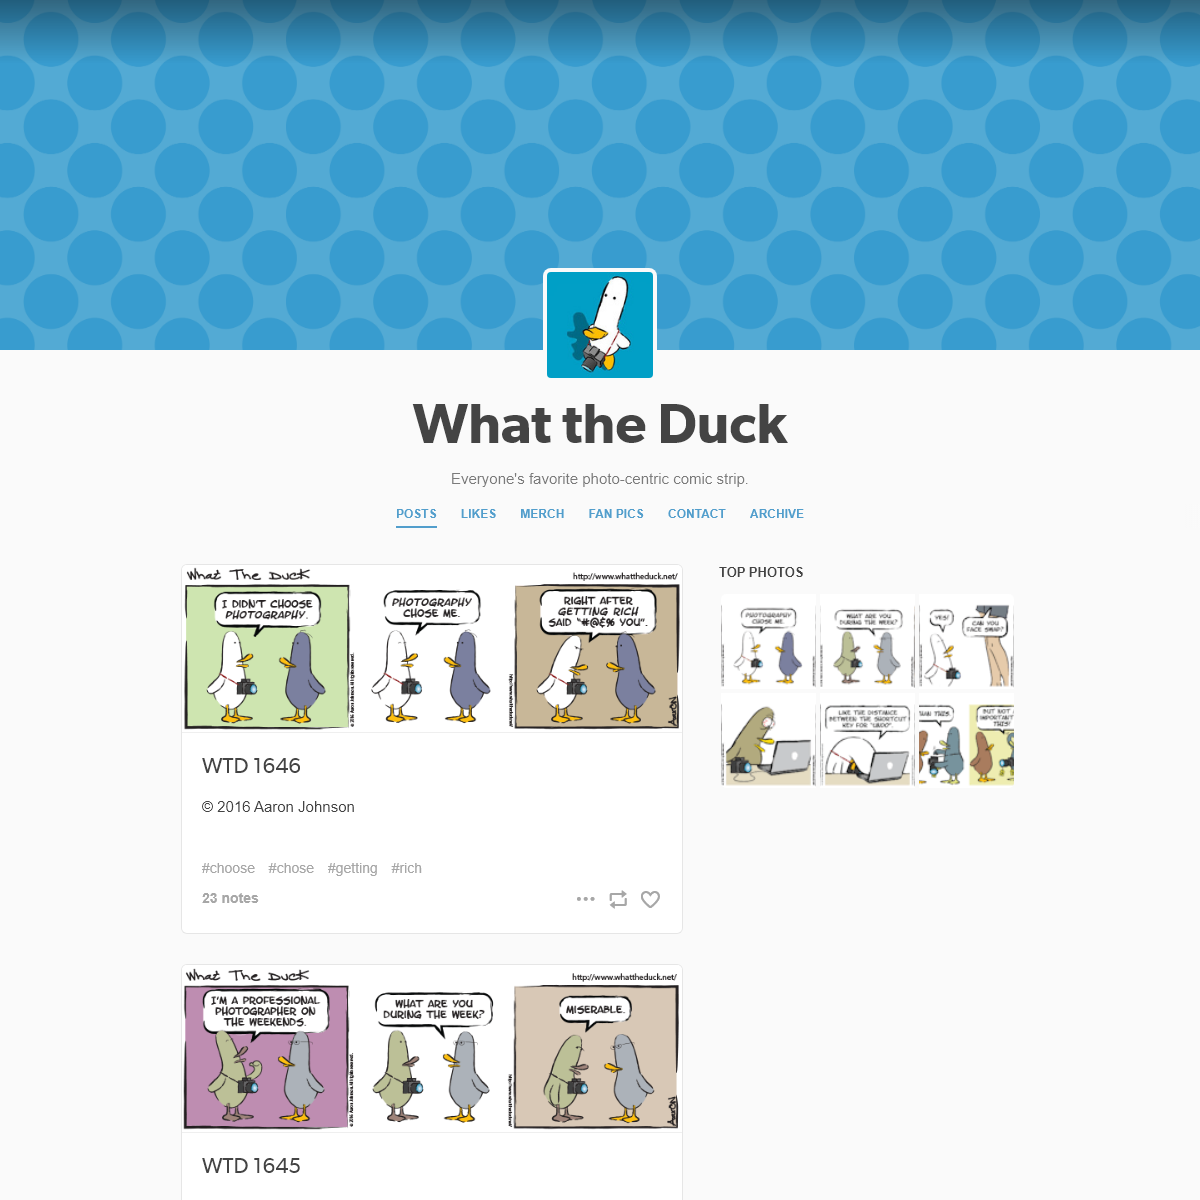 A complete backup of whattheduck.net